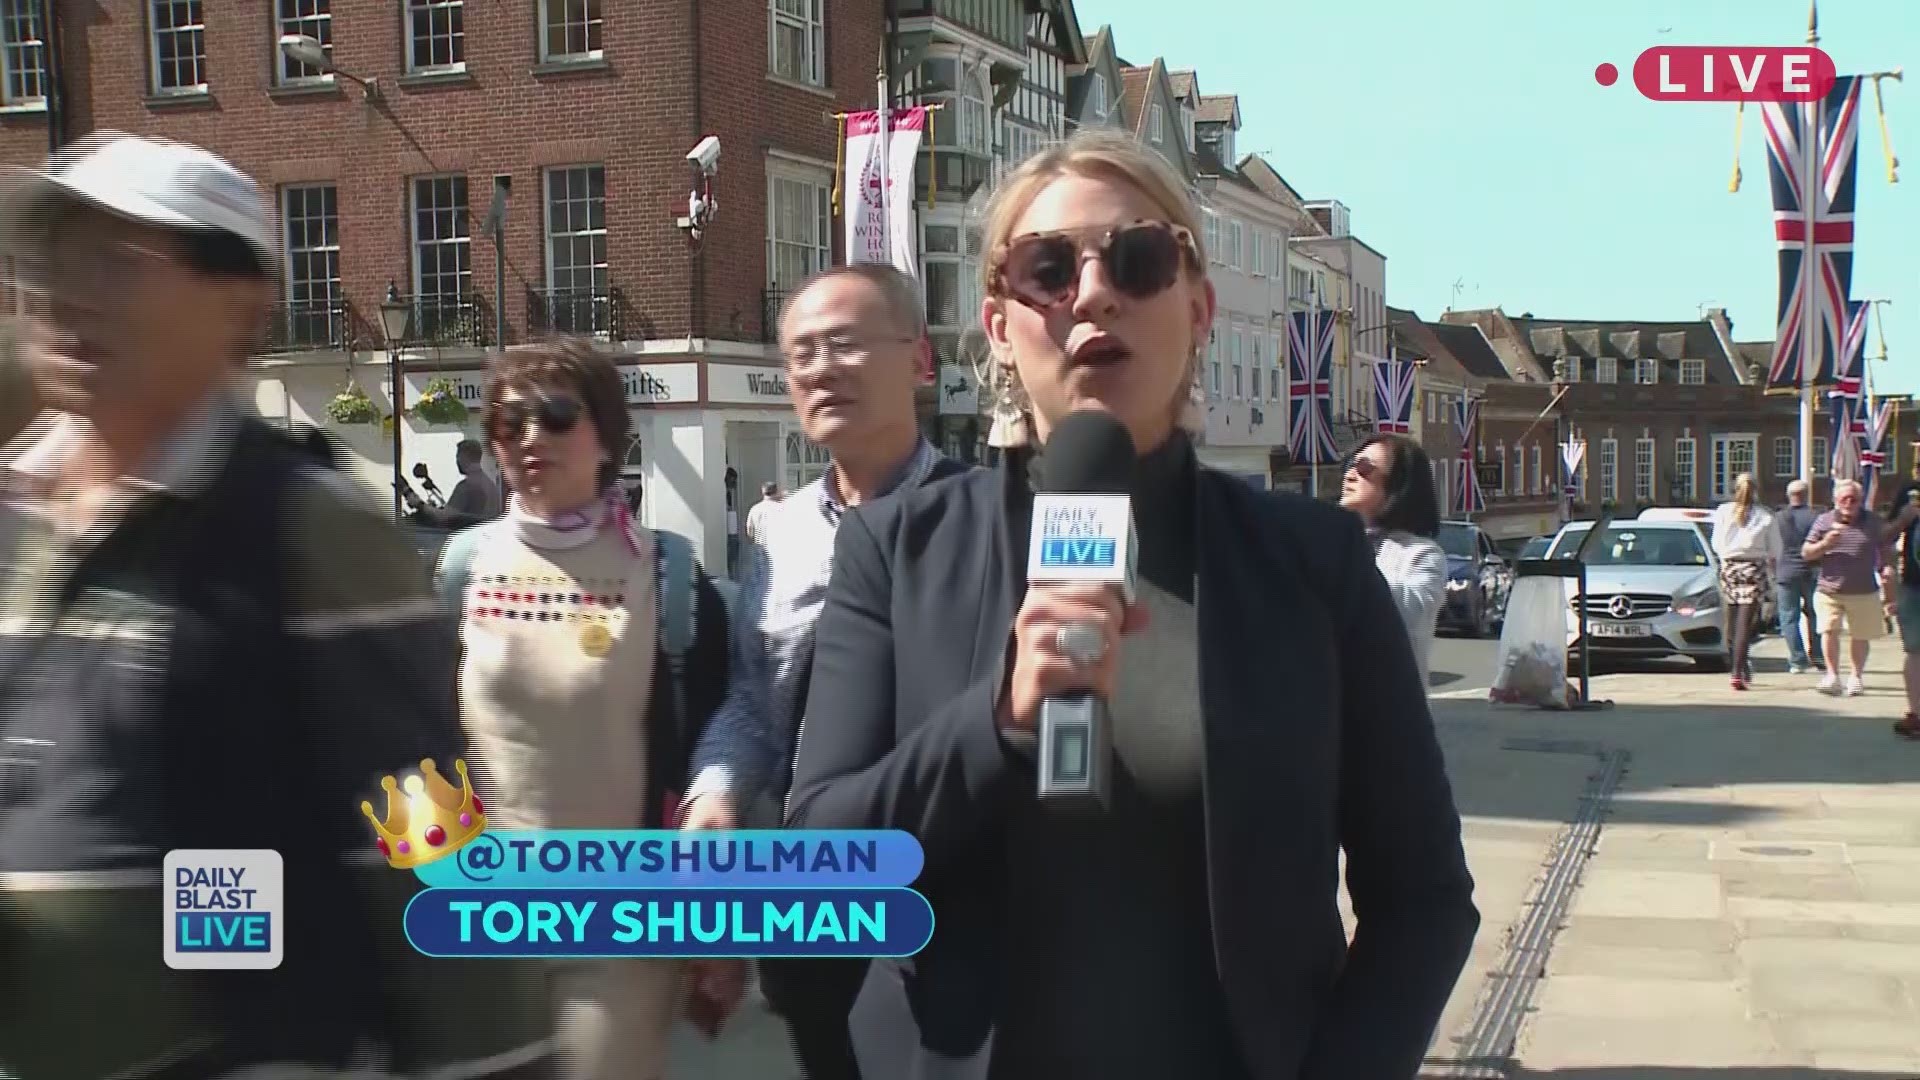 The Royal Wedding is just four days away and everyone wants to know what will Meghan be wearing? Daily Blast LIVE co-host Tory Shulman is LIVE in London tracking all the royal-tea and revealing the secrets behind the show. In this exclusive clip, Tory tak